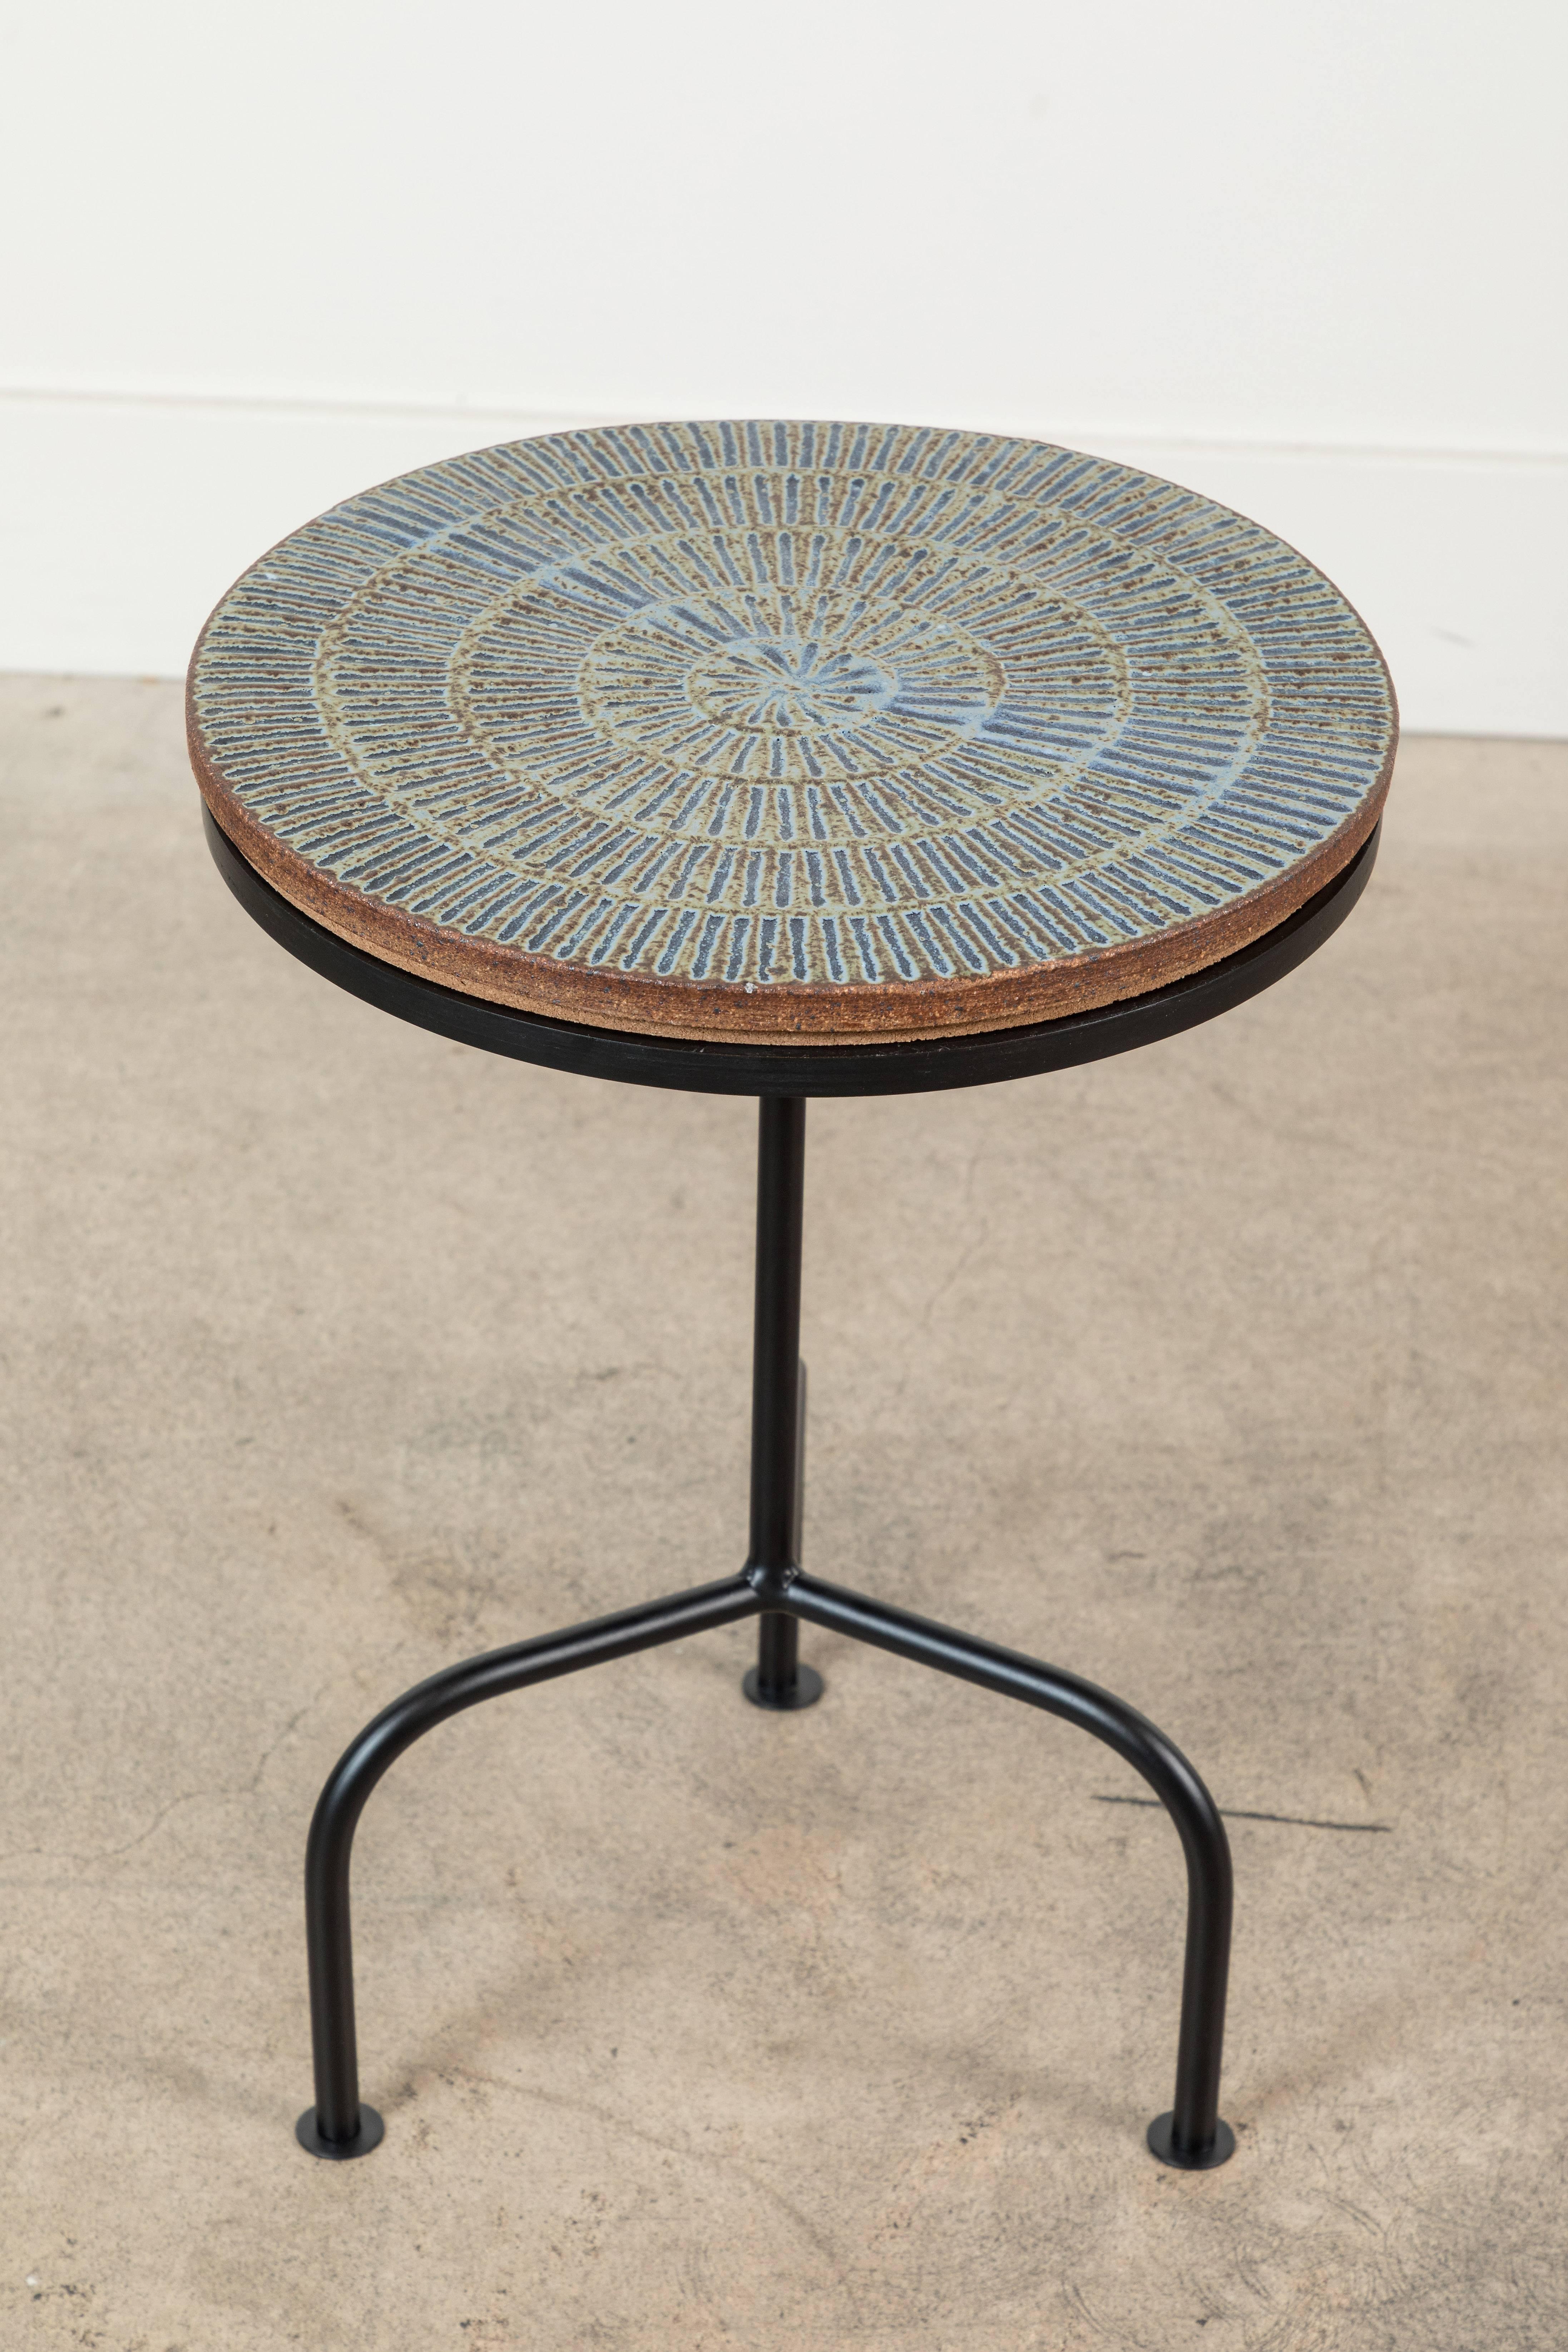 Mid-Century Modern Steel and Ceramic Side Table by Mt. Washington Pottery for Collabs in Clay